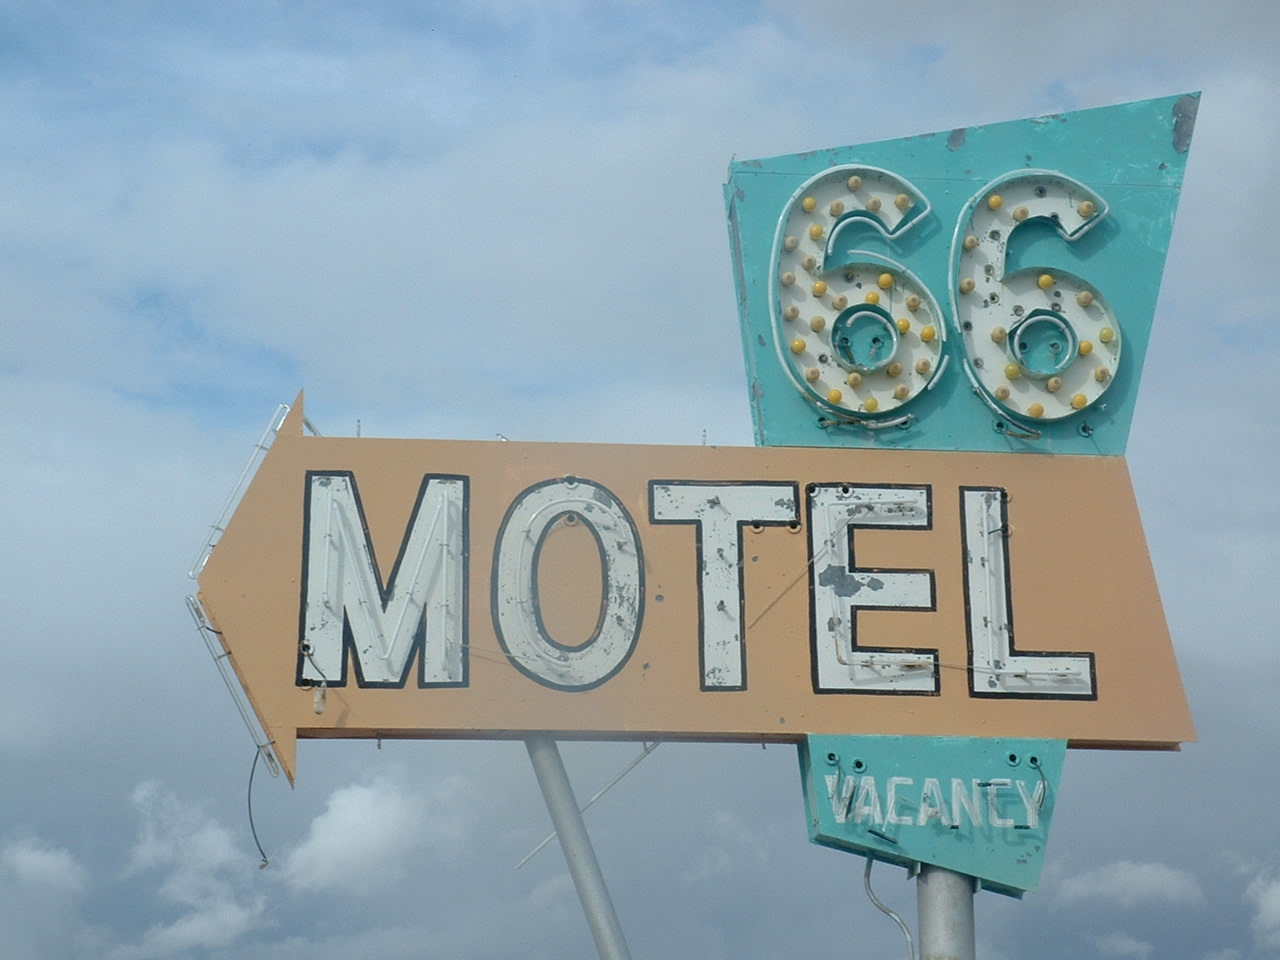 Drive Route 66